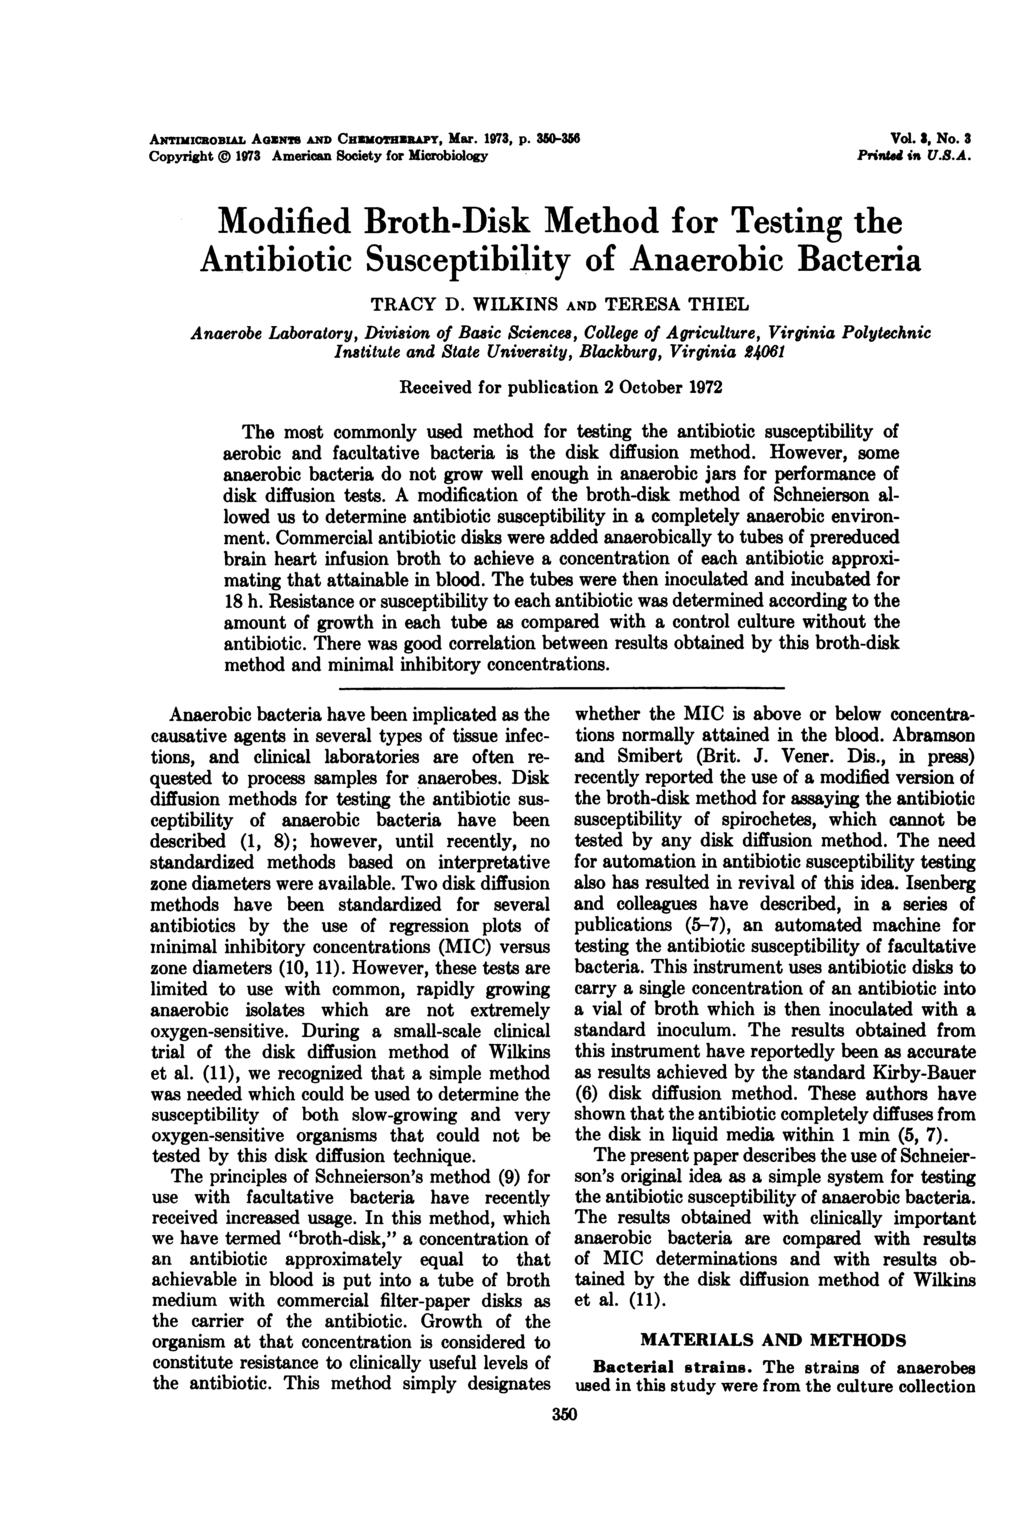 AwNrIcRoBuL AIGENTS AND CHUMOT R"PY, Mar. 1973, p. 35O-356 Copyright 1973 American Society for Microbiology Vol. S, No. 3 Prind in U.S.A. Modified Broth-Disk Method for Testing the Antibiotic Susceptibility of Anaerobic Bacteria TRACY D.